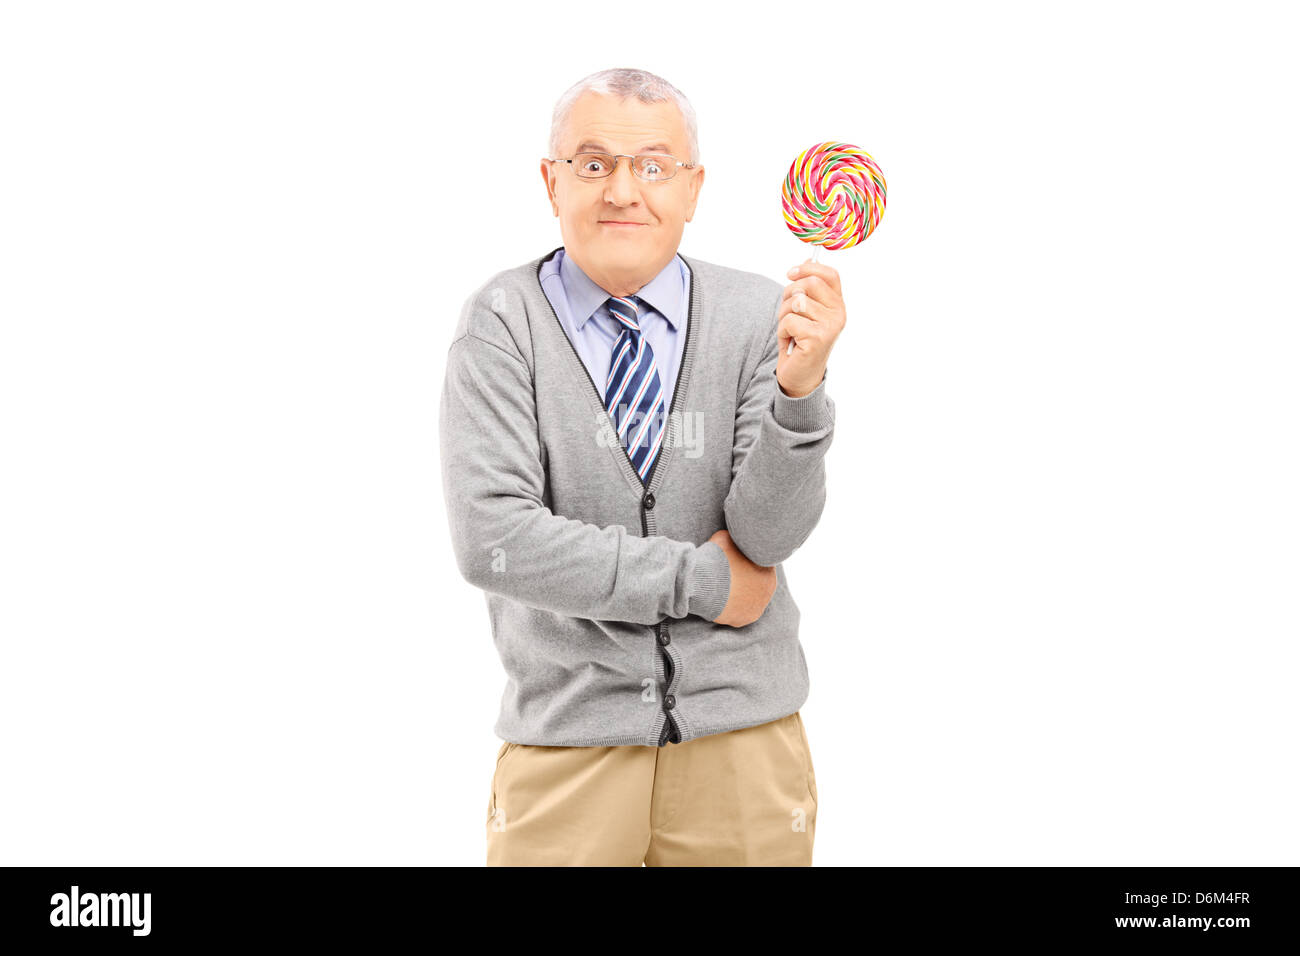 Mature man holding a colorful lollipop, isolated on white background Stock Photo